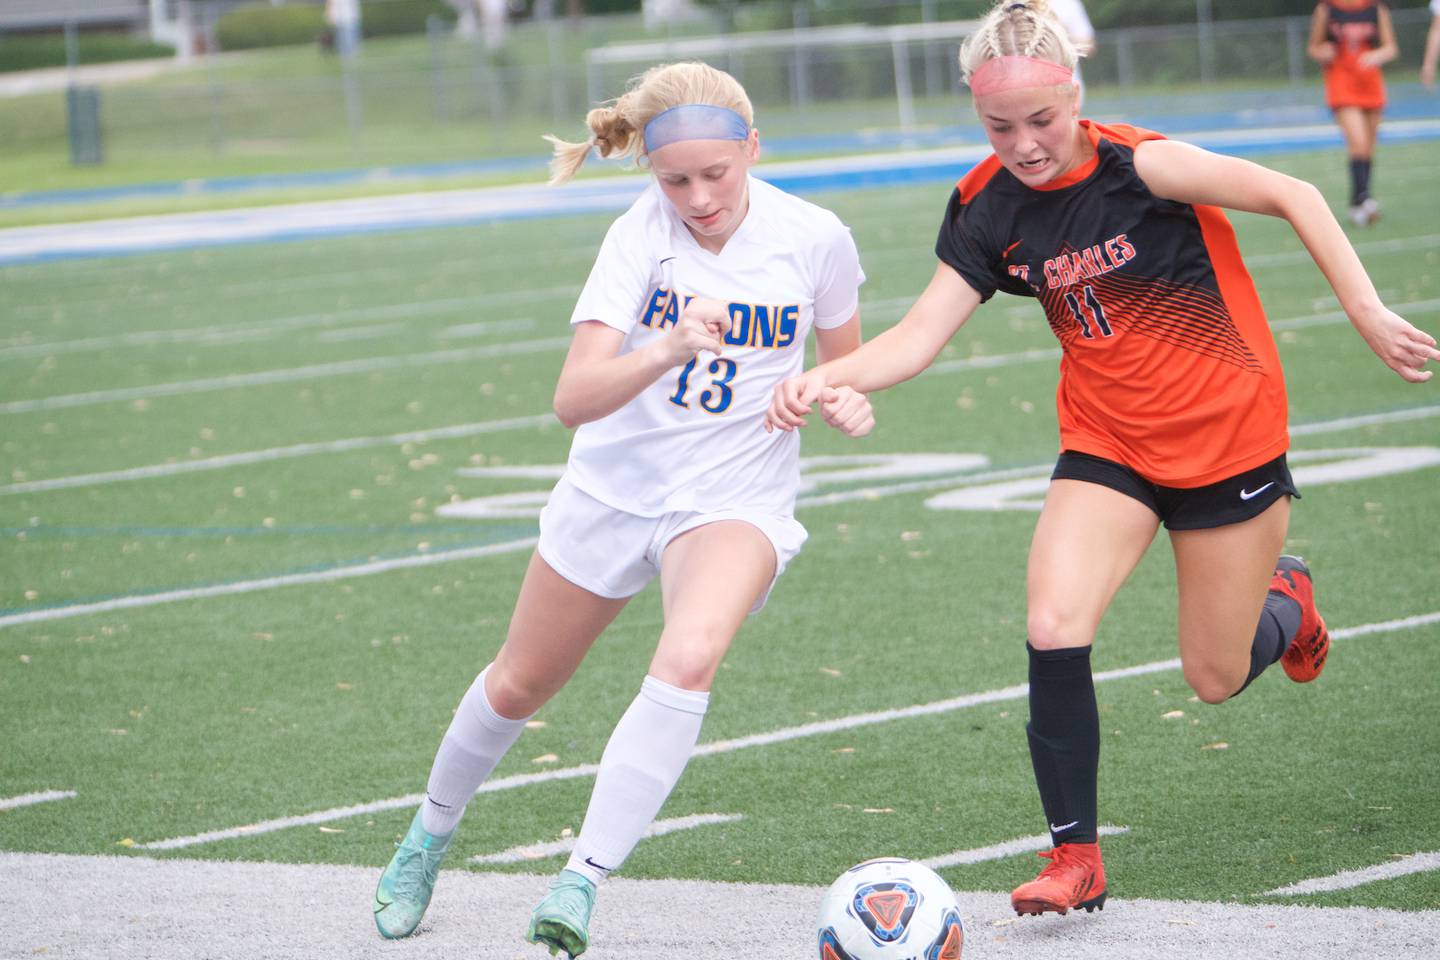 Wheaton North's Piper Harborth battles for the ball with St. Charles East's Ella Stehman at the Class 3A Regional Final in Wheaton on May 20,2022.